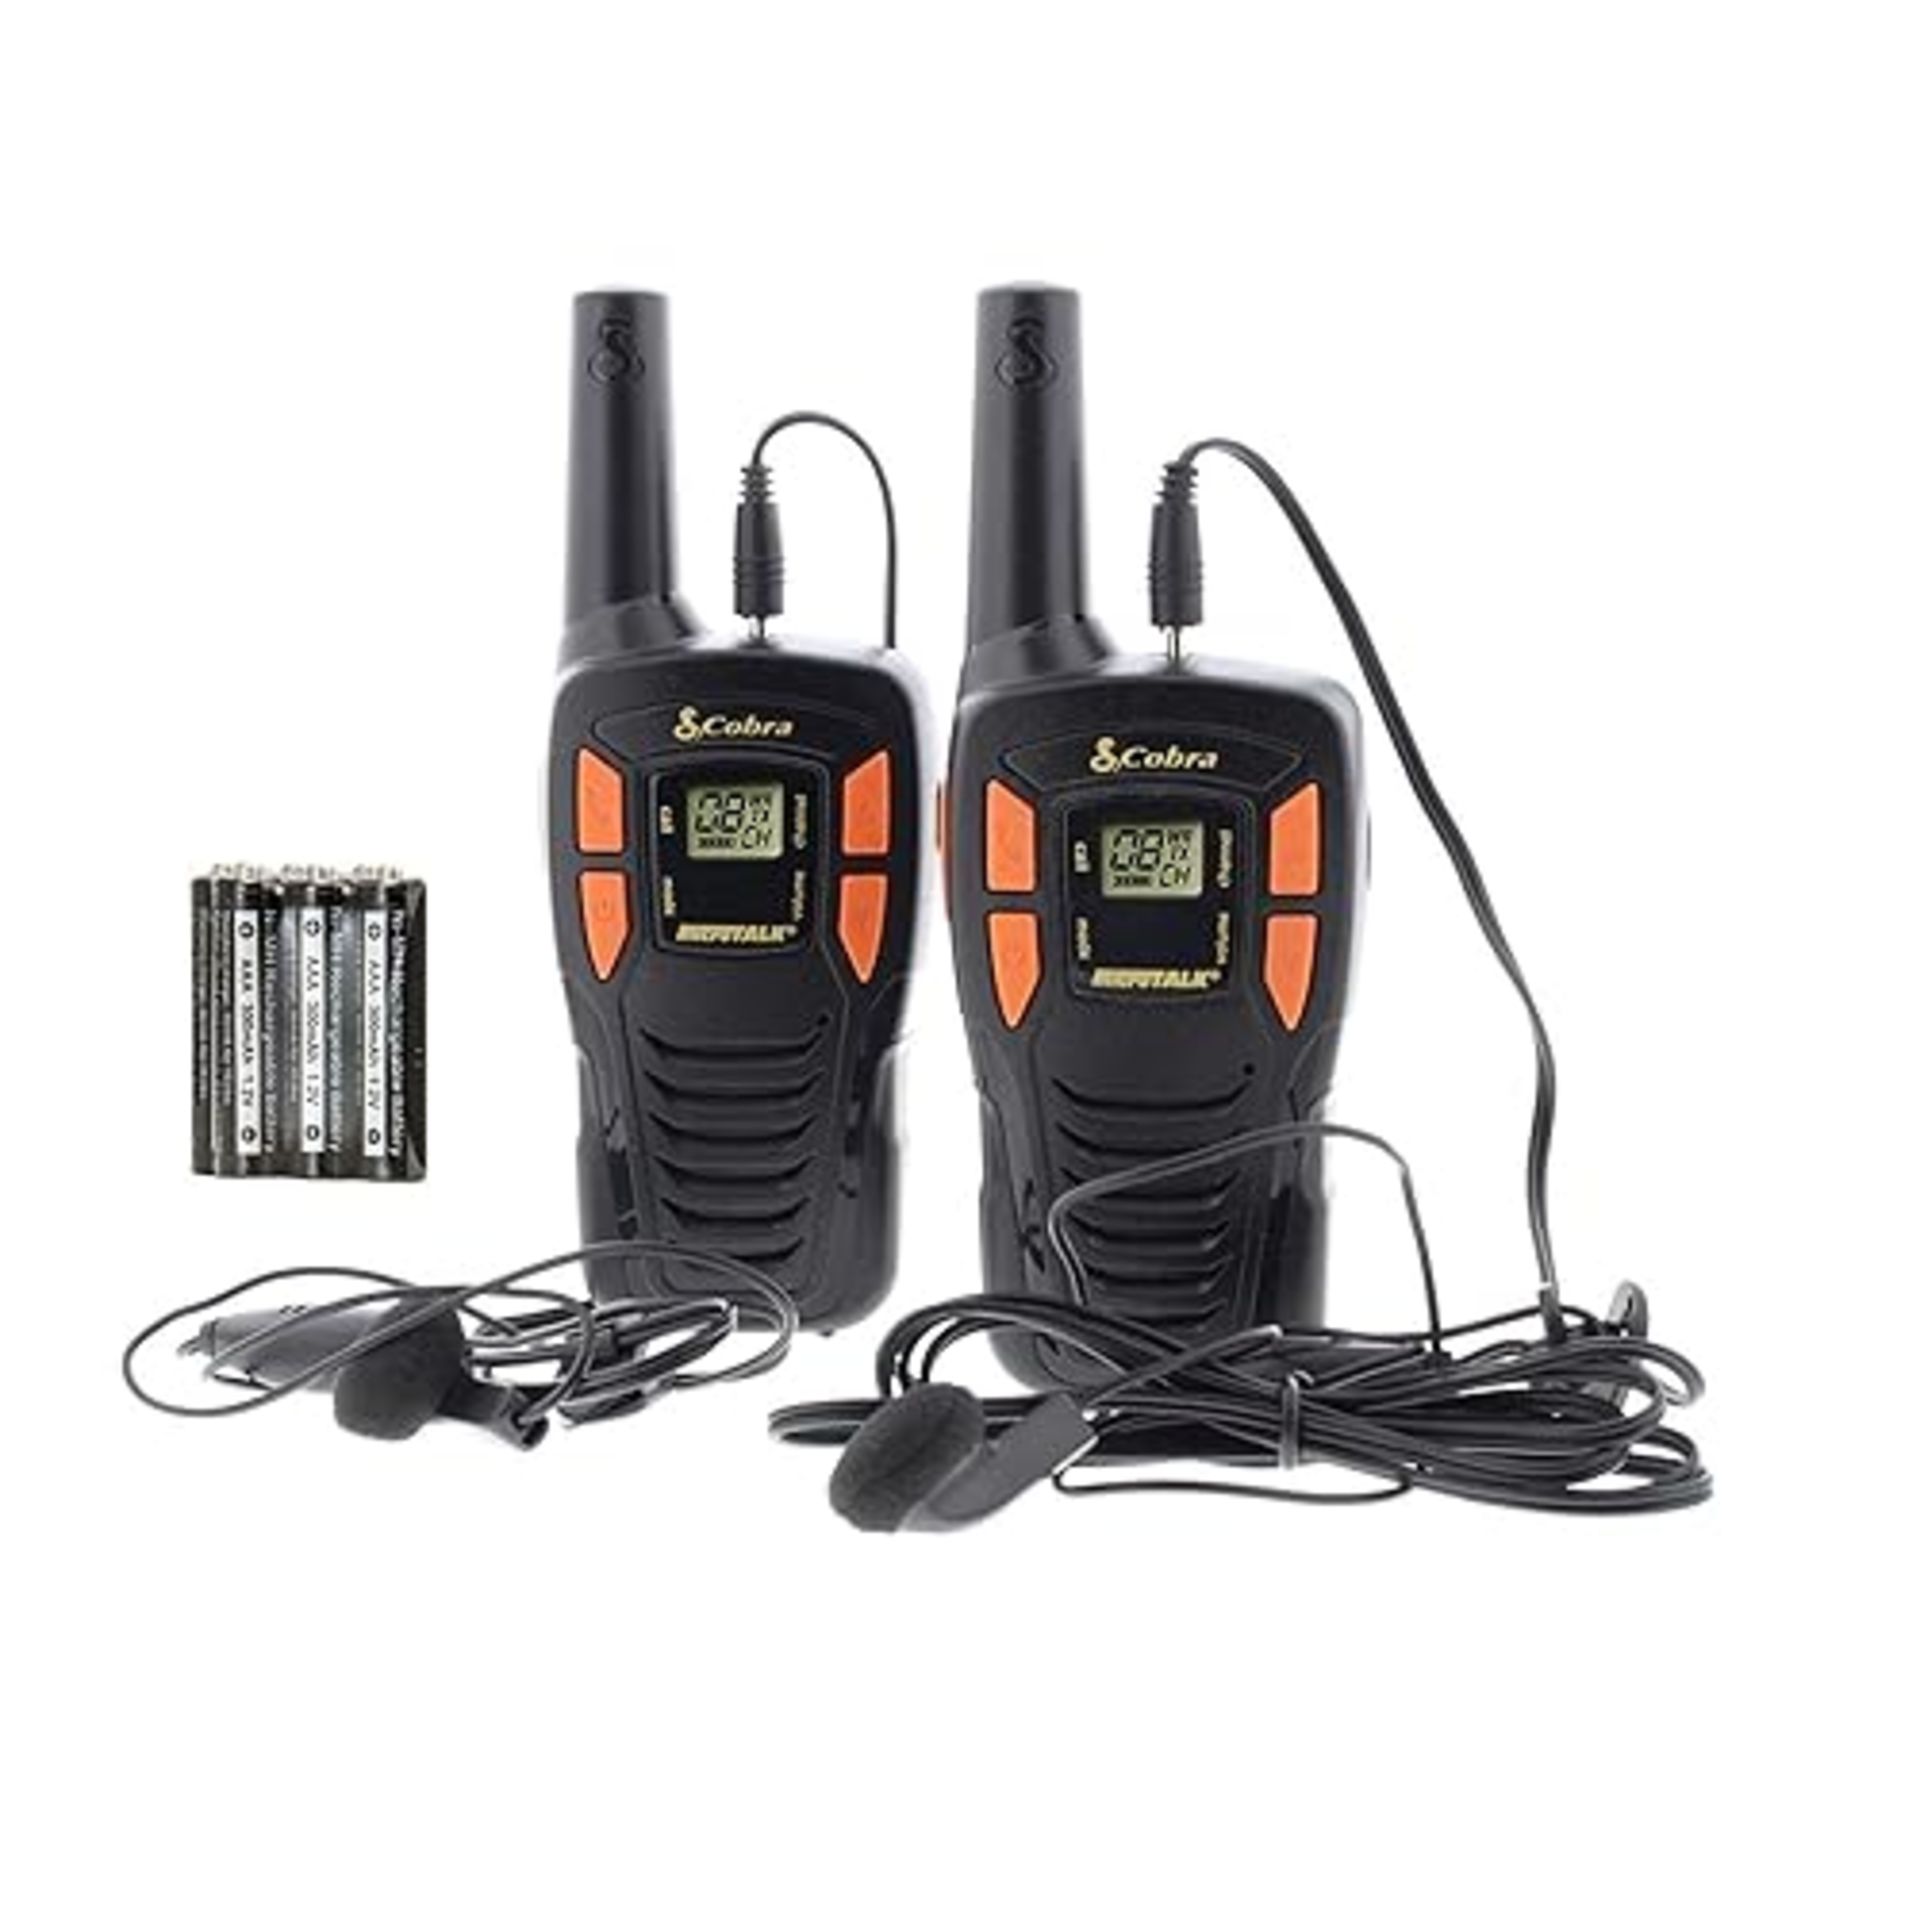 Cobra AM245 BBX Walkie Talkie - Weather Resistant With GA-EBM2 Earbud Microphone and Rechargeable...